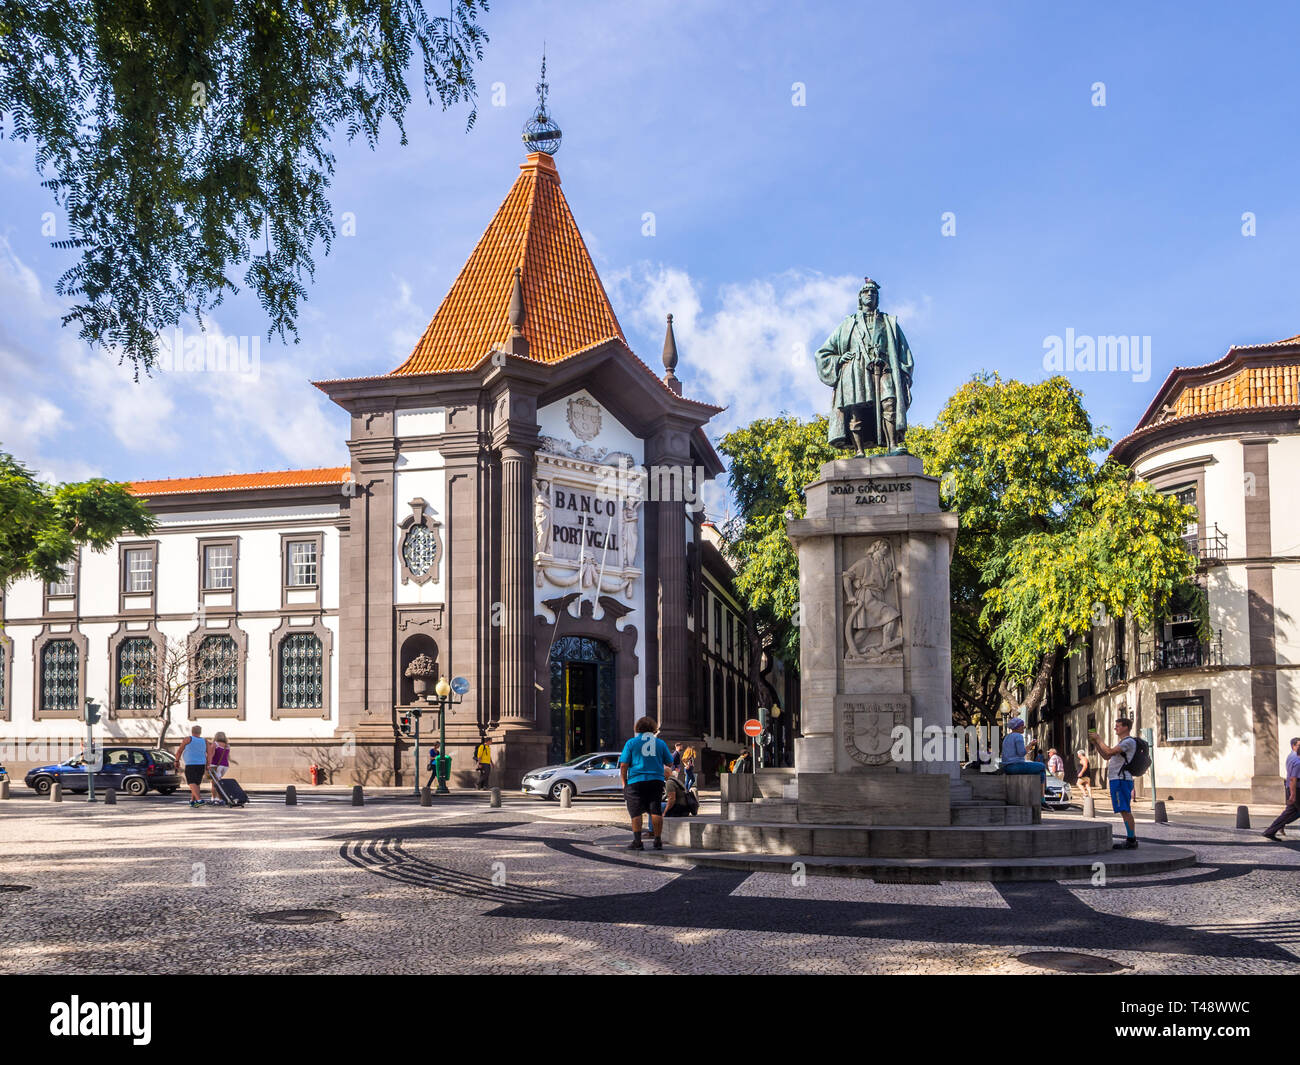 Madeira, Portugal - October 31, 2018: Monument of Joao Goncalves Zarco and the bilding of Banco de Portugal in Funchal, the capital of Madeira, Portug Stock Photo